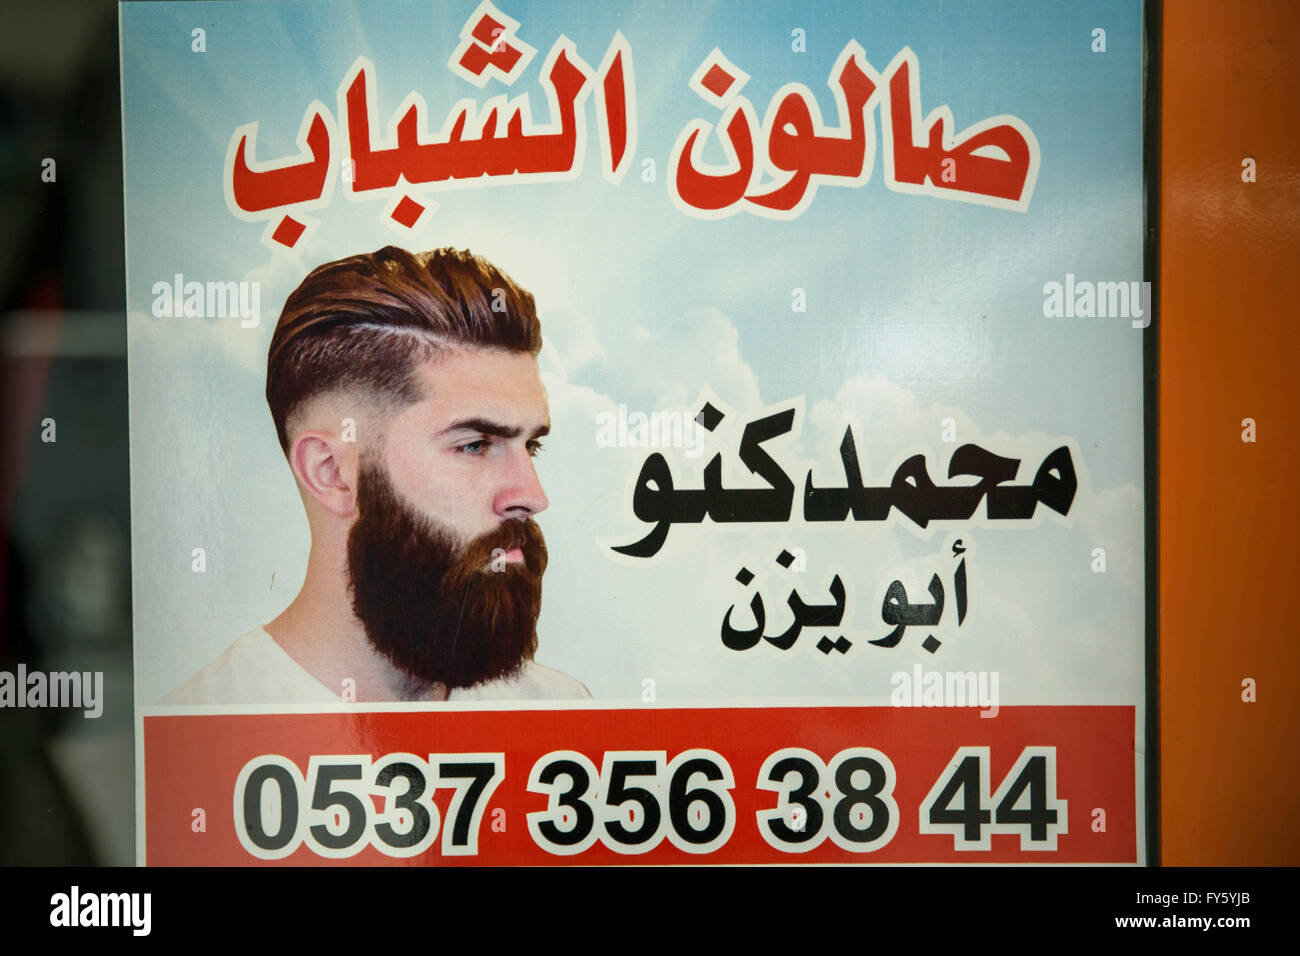 Kilis, Turkey. 22nd Apr, 2016. An advertising for a barber shop written in arabic letters is seen in Kilis, Turkey, 22 April 2016. Many arabs live in the towns along the turkish-syrian border. Photo: Uygar Onder Simsek/dpa/Alamy Live News Stock Photo